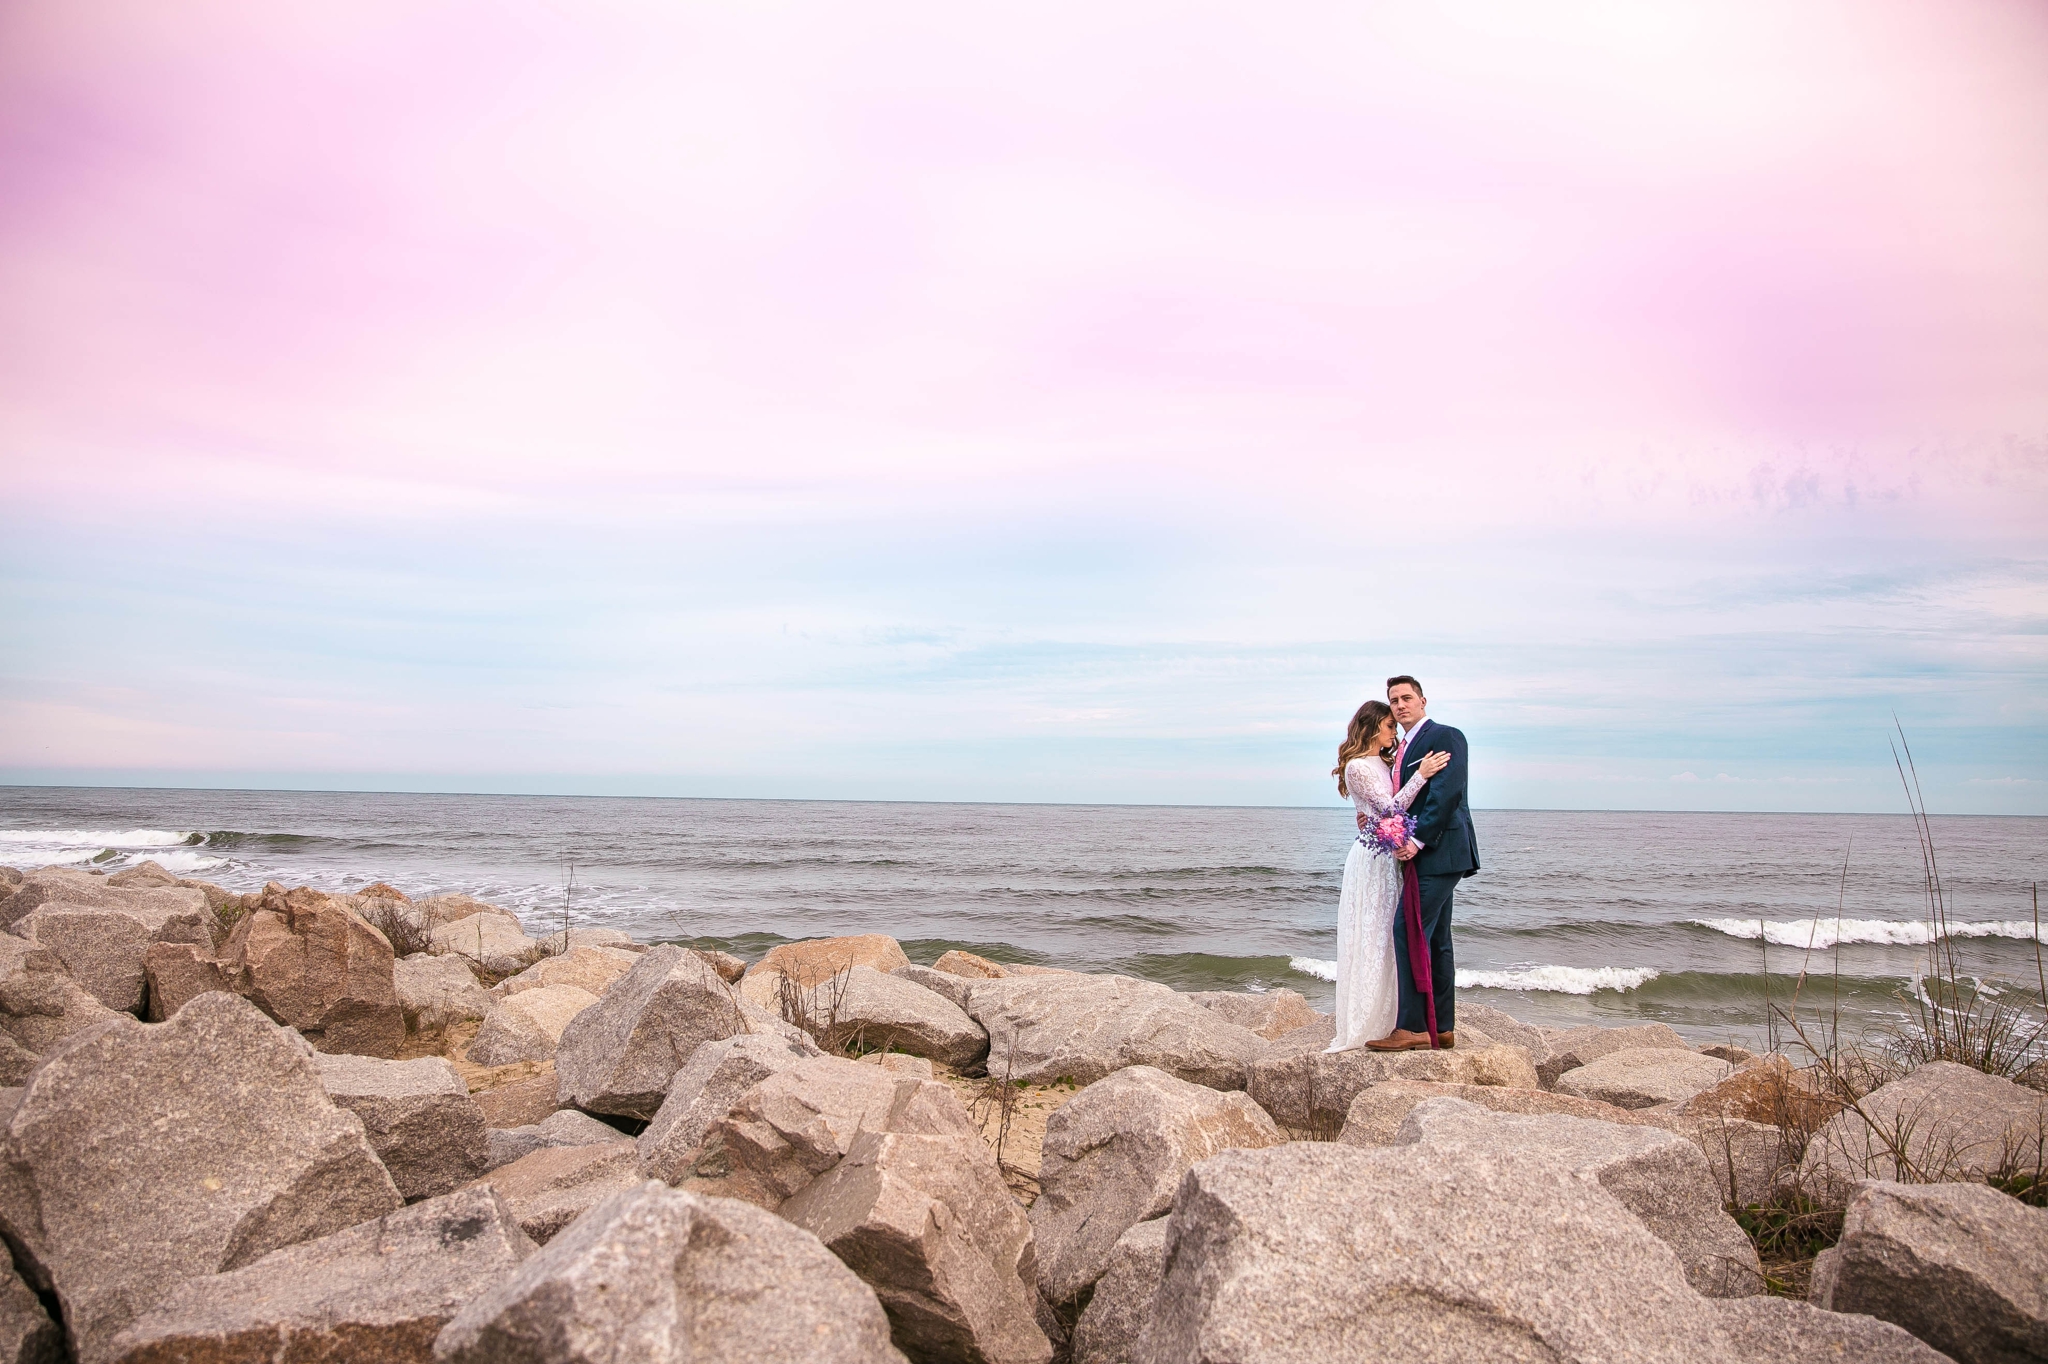 Cotton Candy Sky Beach Elopement Portraits - Bride and Groom on top of the Cliffs - - dress by asos with purple and pink flowers and navy suit - oahu hawaii wedding photographer